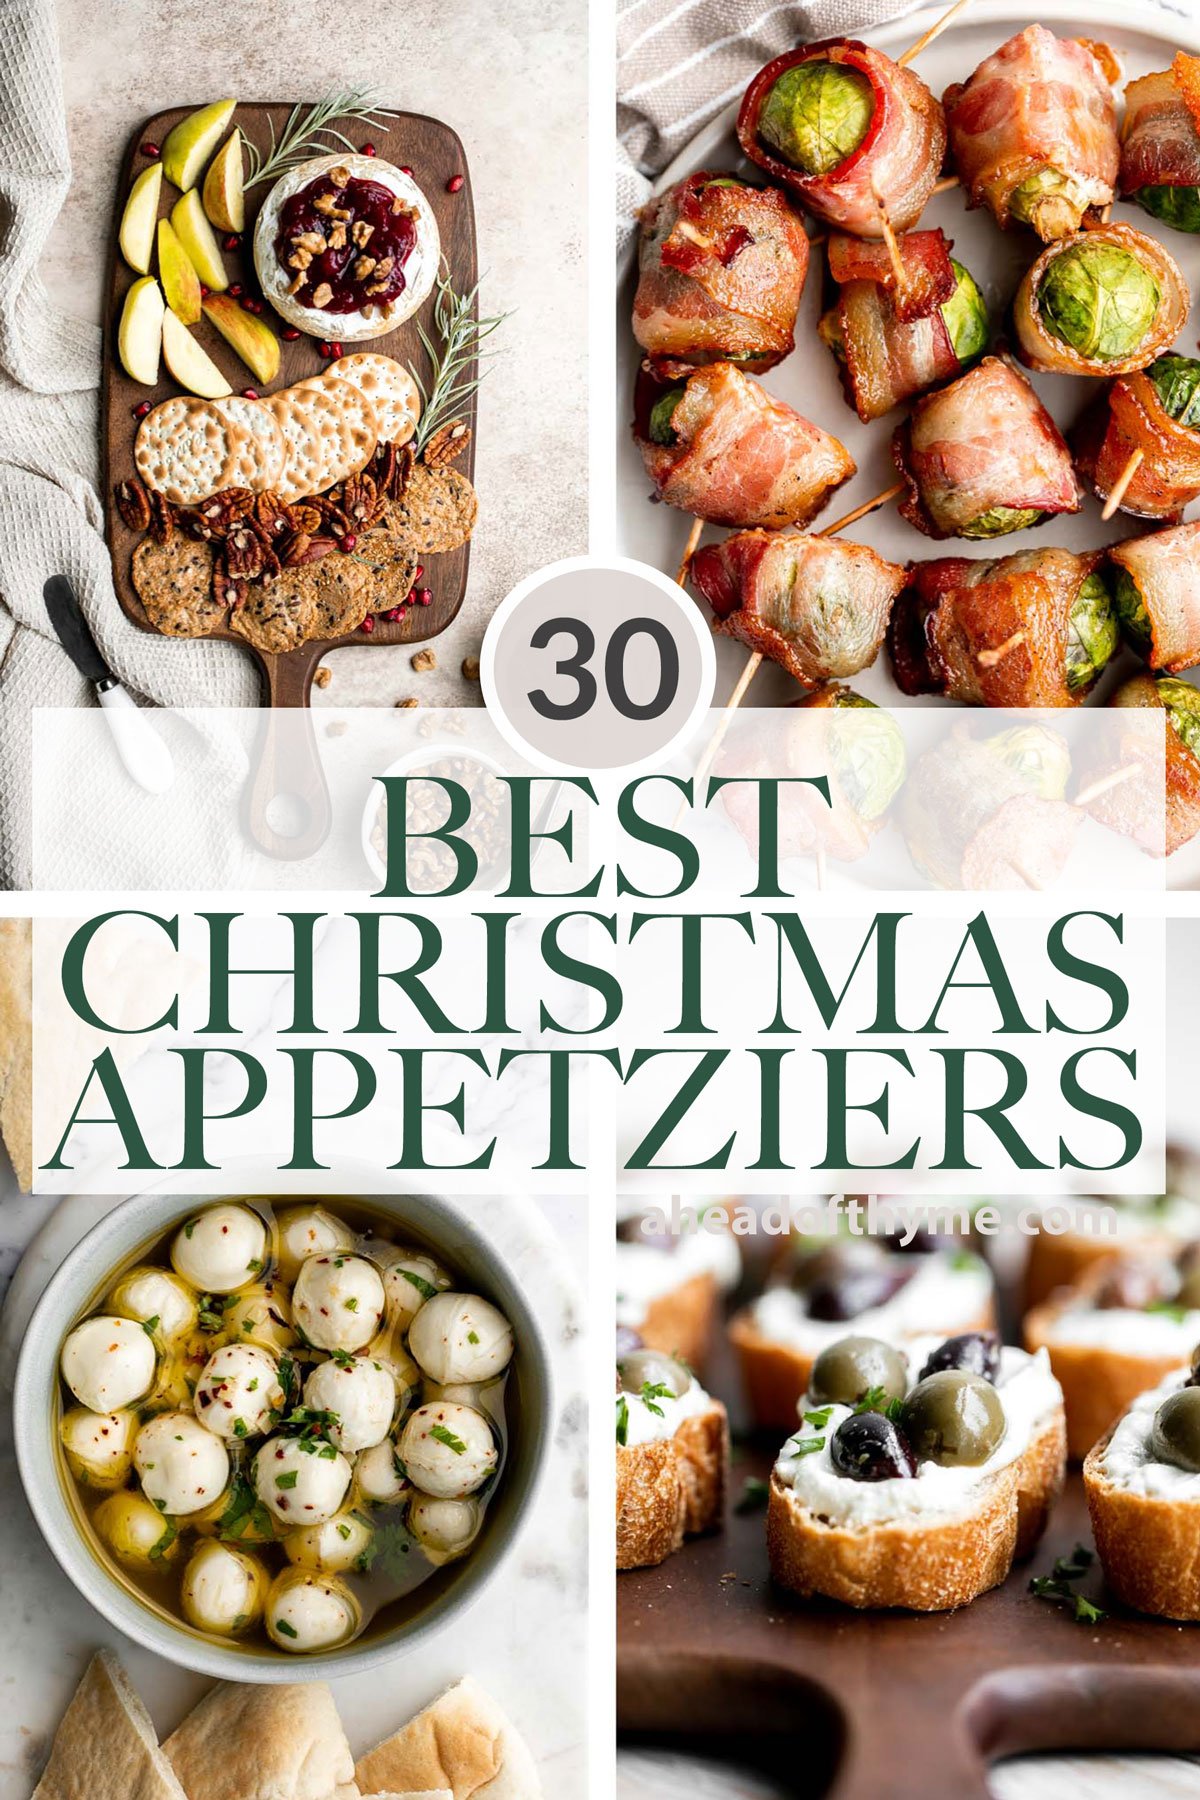 30 Best Christmas Appetizers